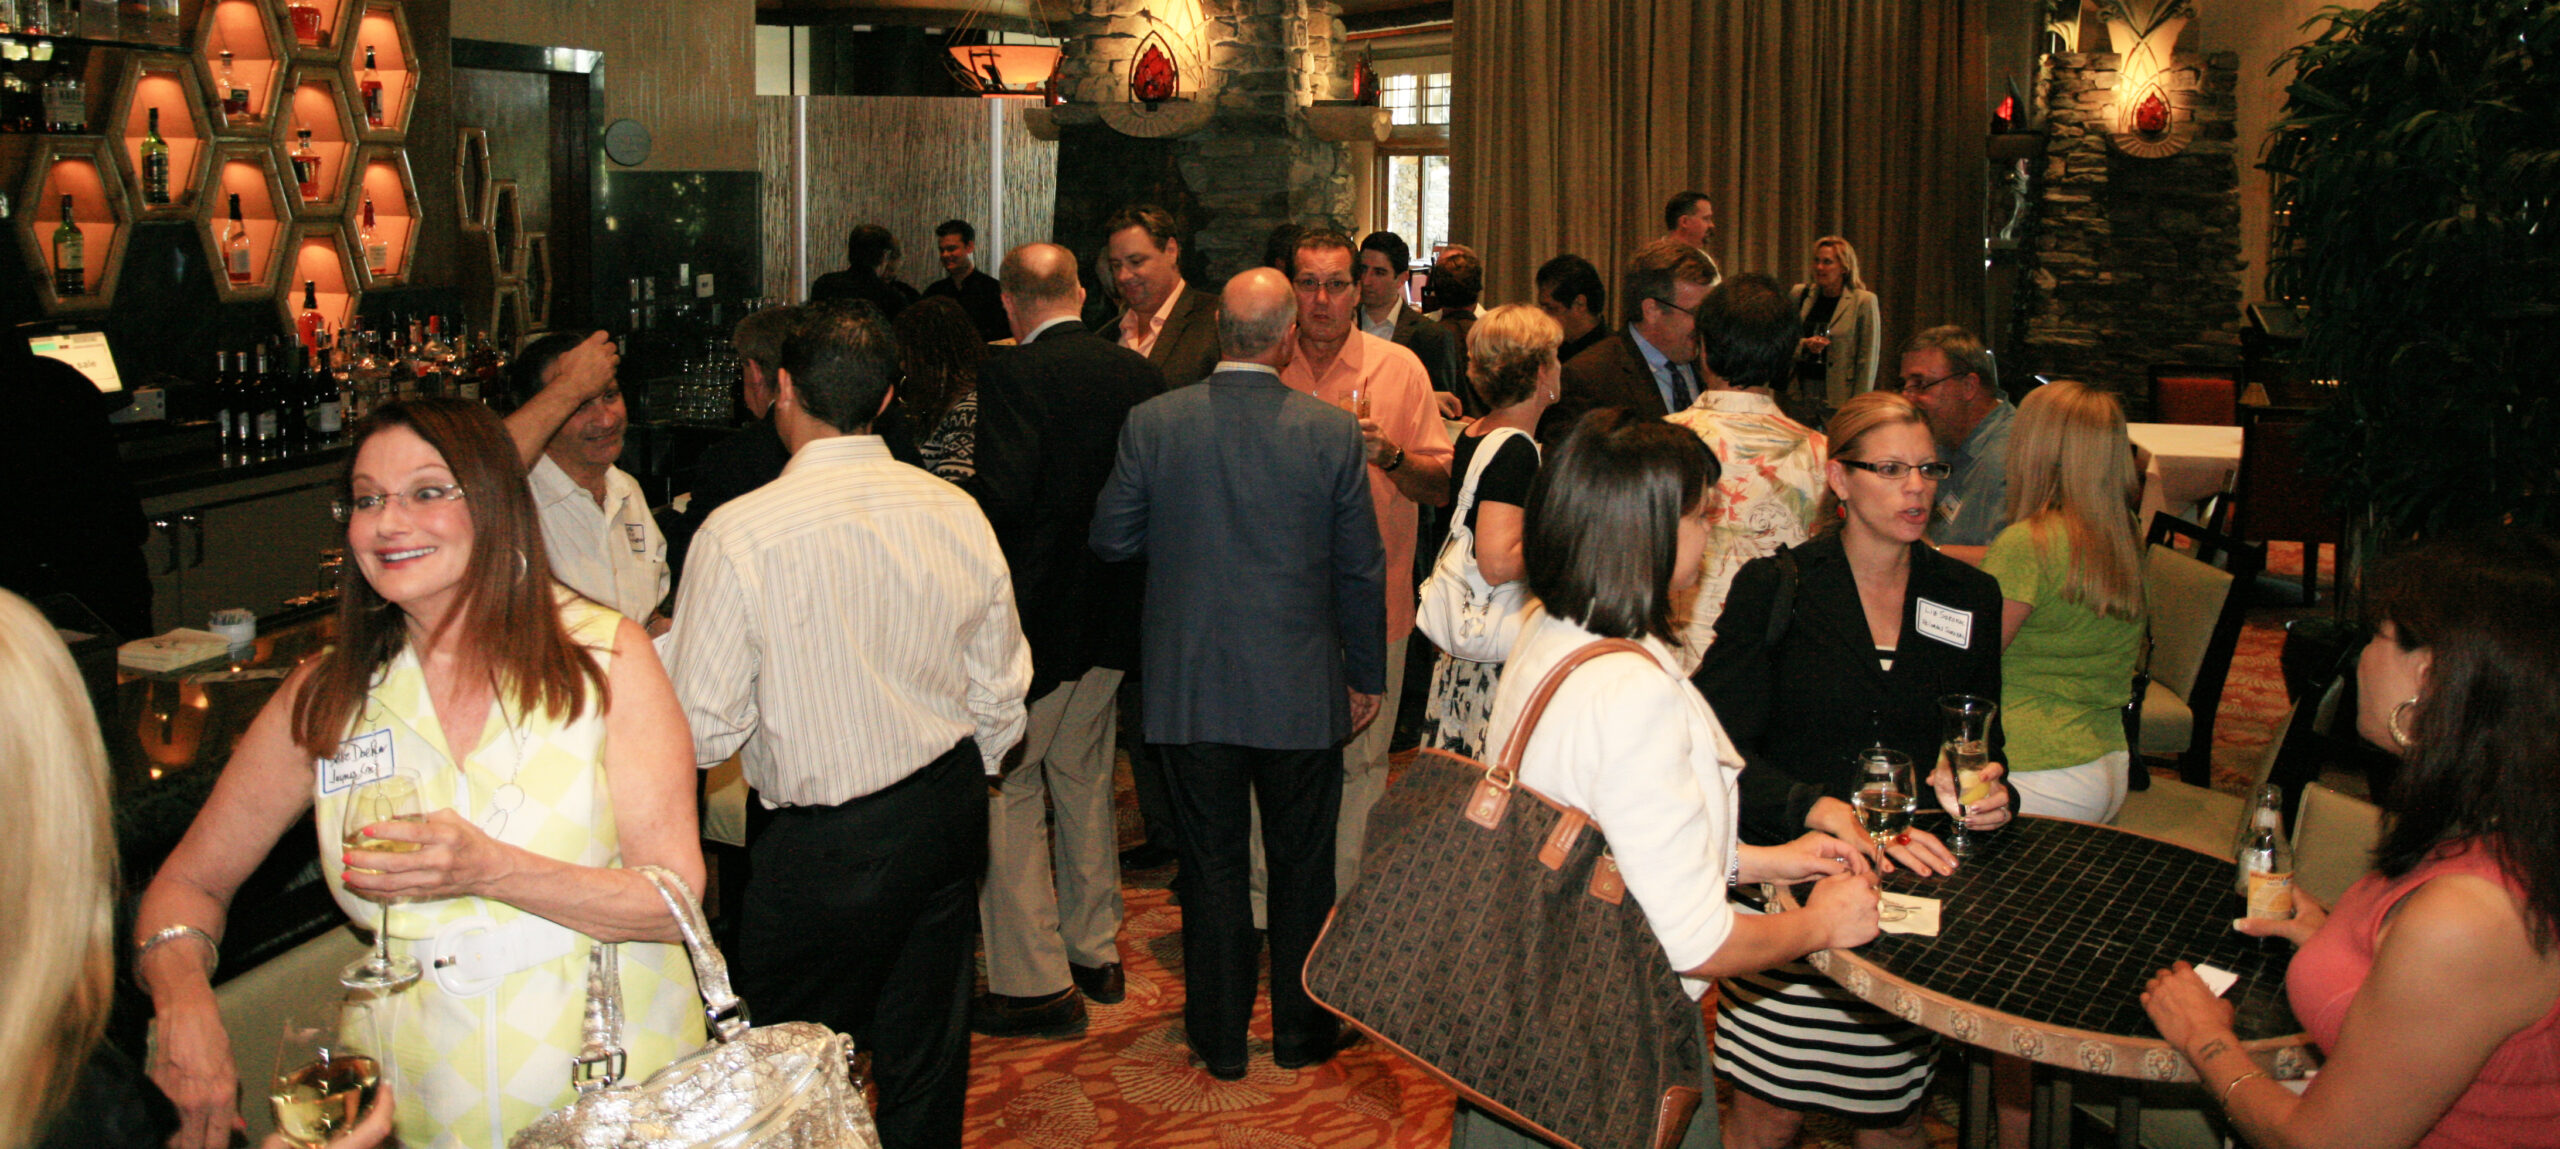 CALV is hosting its annual spring networking mixer for local commercial real estate professionals.